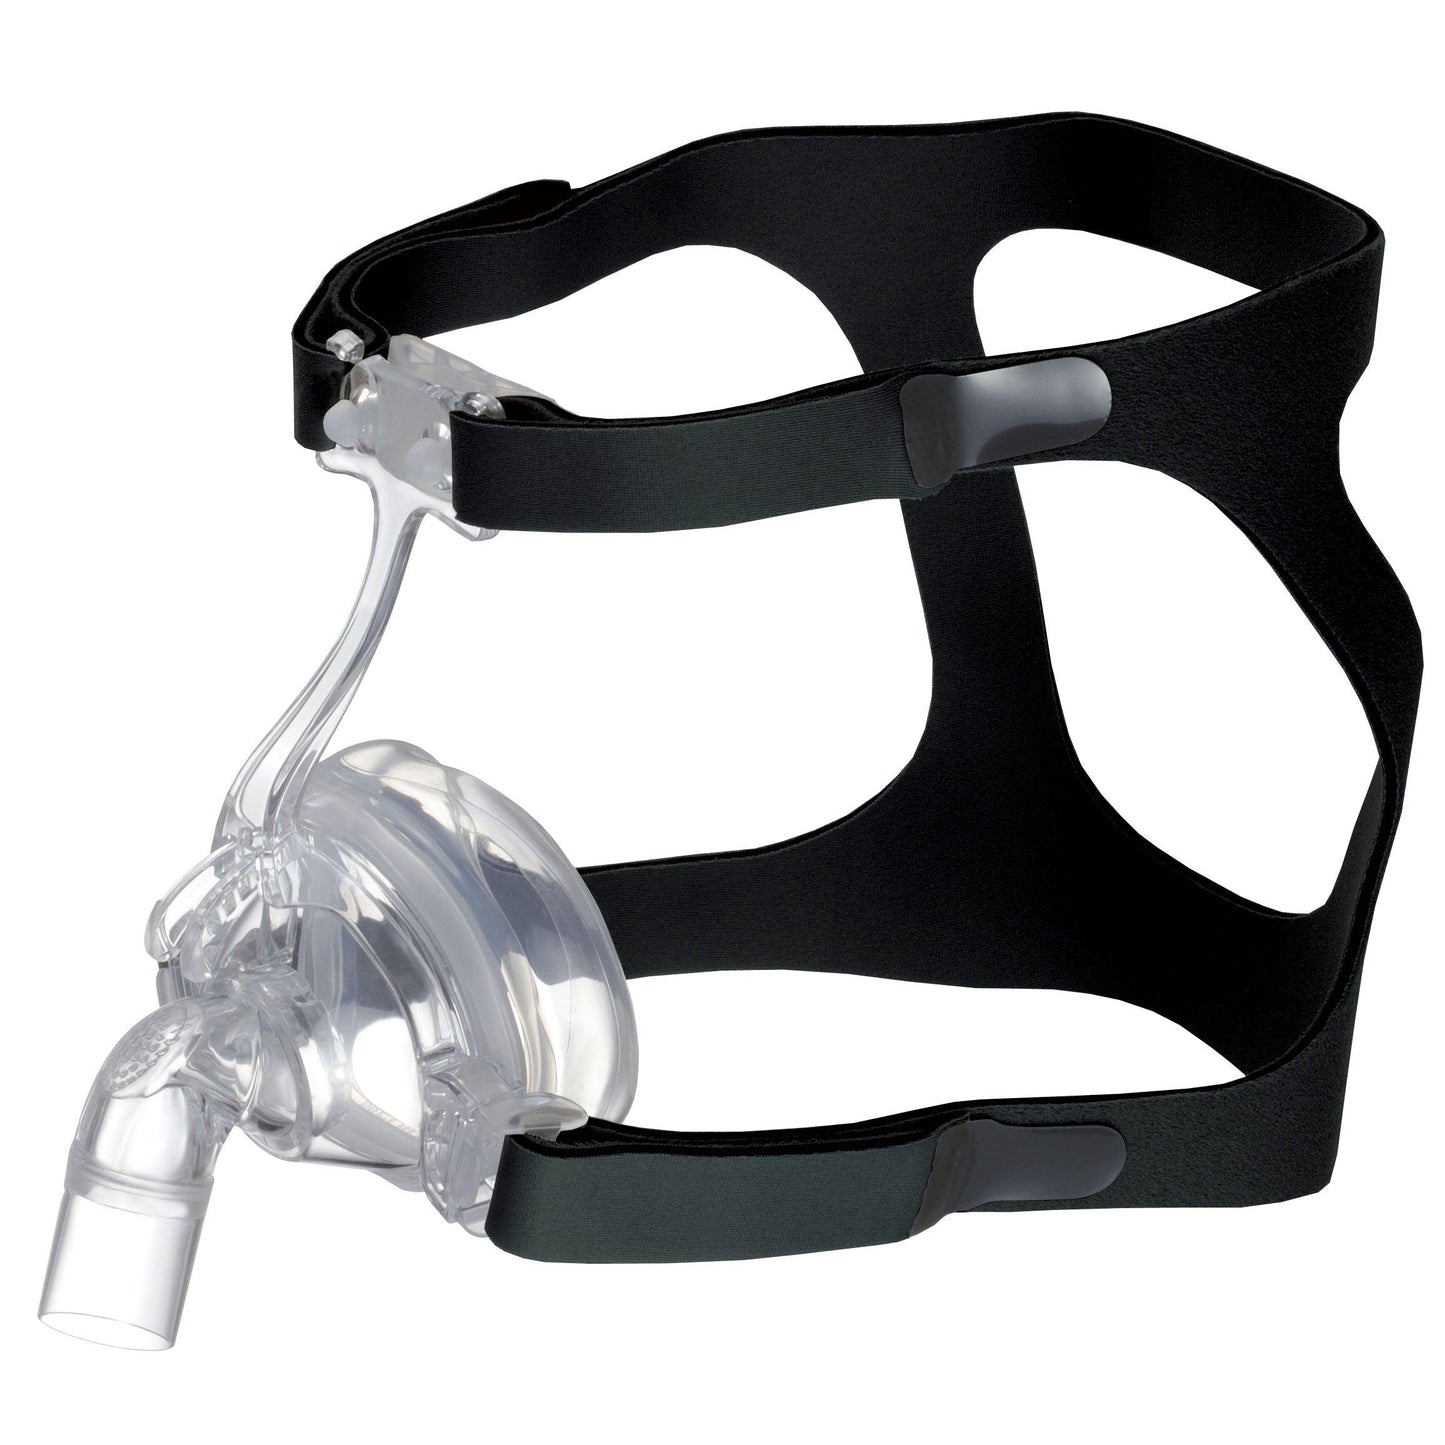 NEW Medium Sunset Healthcare Adjustable Deluxe Nasal CPAP Mask with Headgear CM106M - MBR Medicals